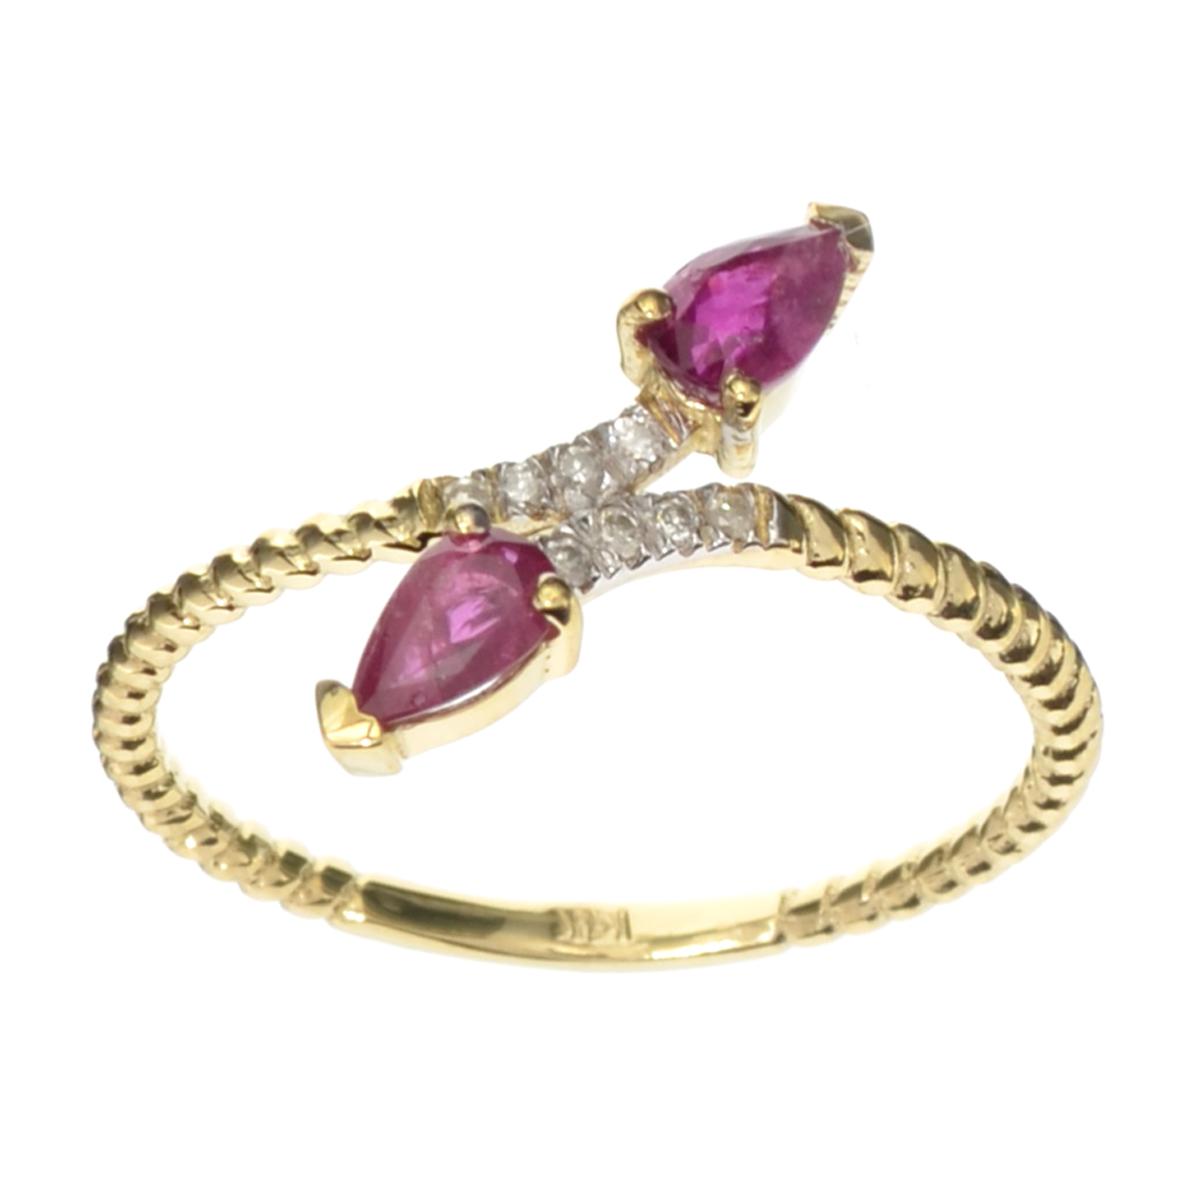 APP: 0.8k Fine Jewelry 14KT. Gold, 0.53CT Ruby And Diamond Ring